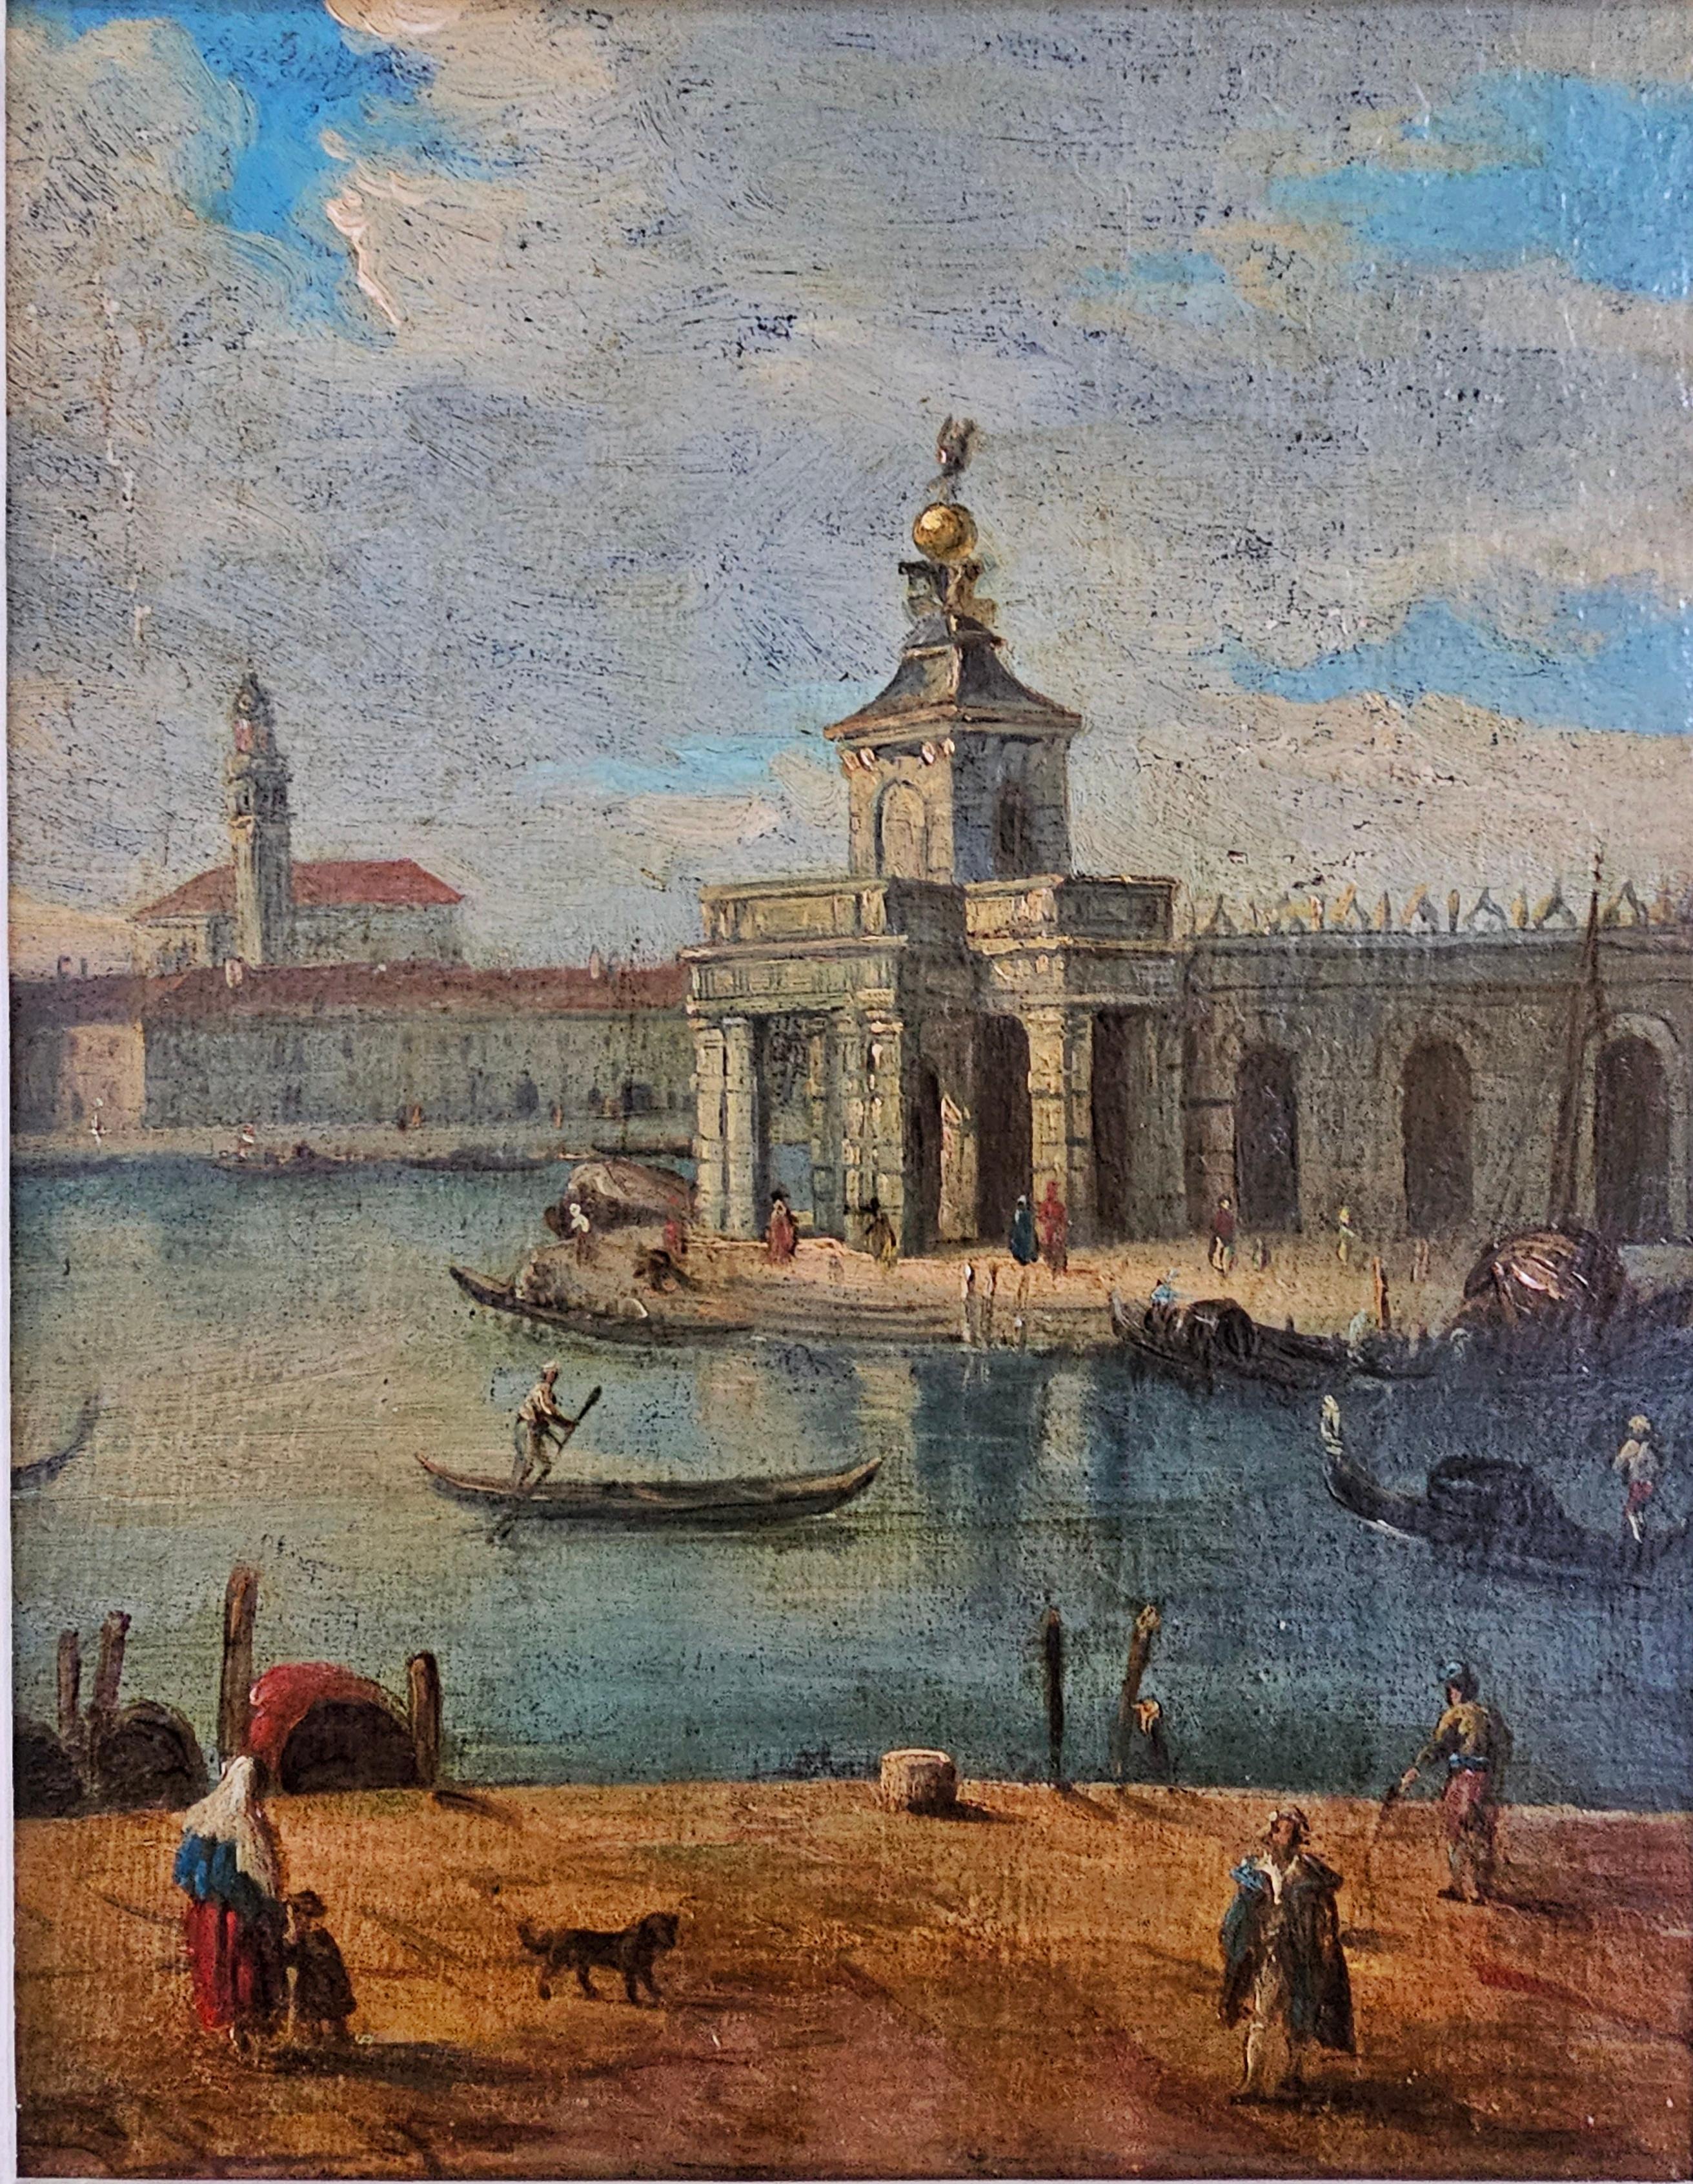 In this listing you will find a painting done in style of Francesco Guardi Guardi. The painting depicts Dogana da Mar, located in Punta della Dogana - the triangular area of Venice, Italy, where the Grand Canal meets the Giudecca Canal, and its